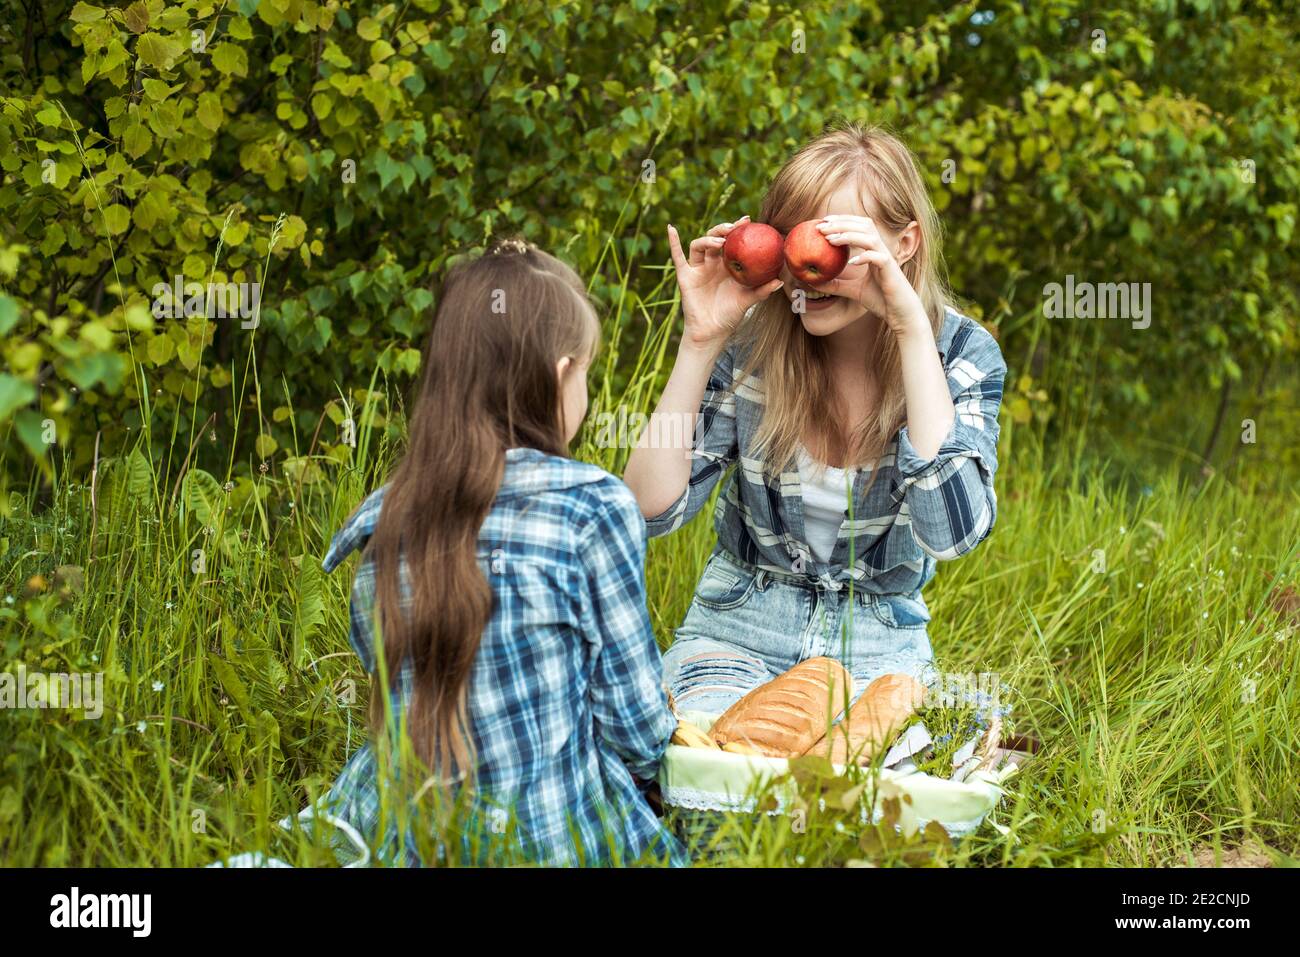 Happy smiling woman and fun enjoying kid, mother holding the red apples near the eyes.Picnic in the park, happy family. Sunny summer day outdoors Stock Photo